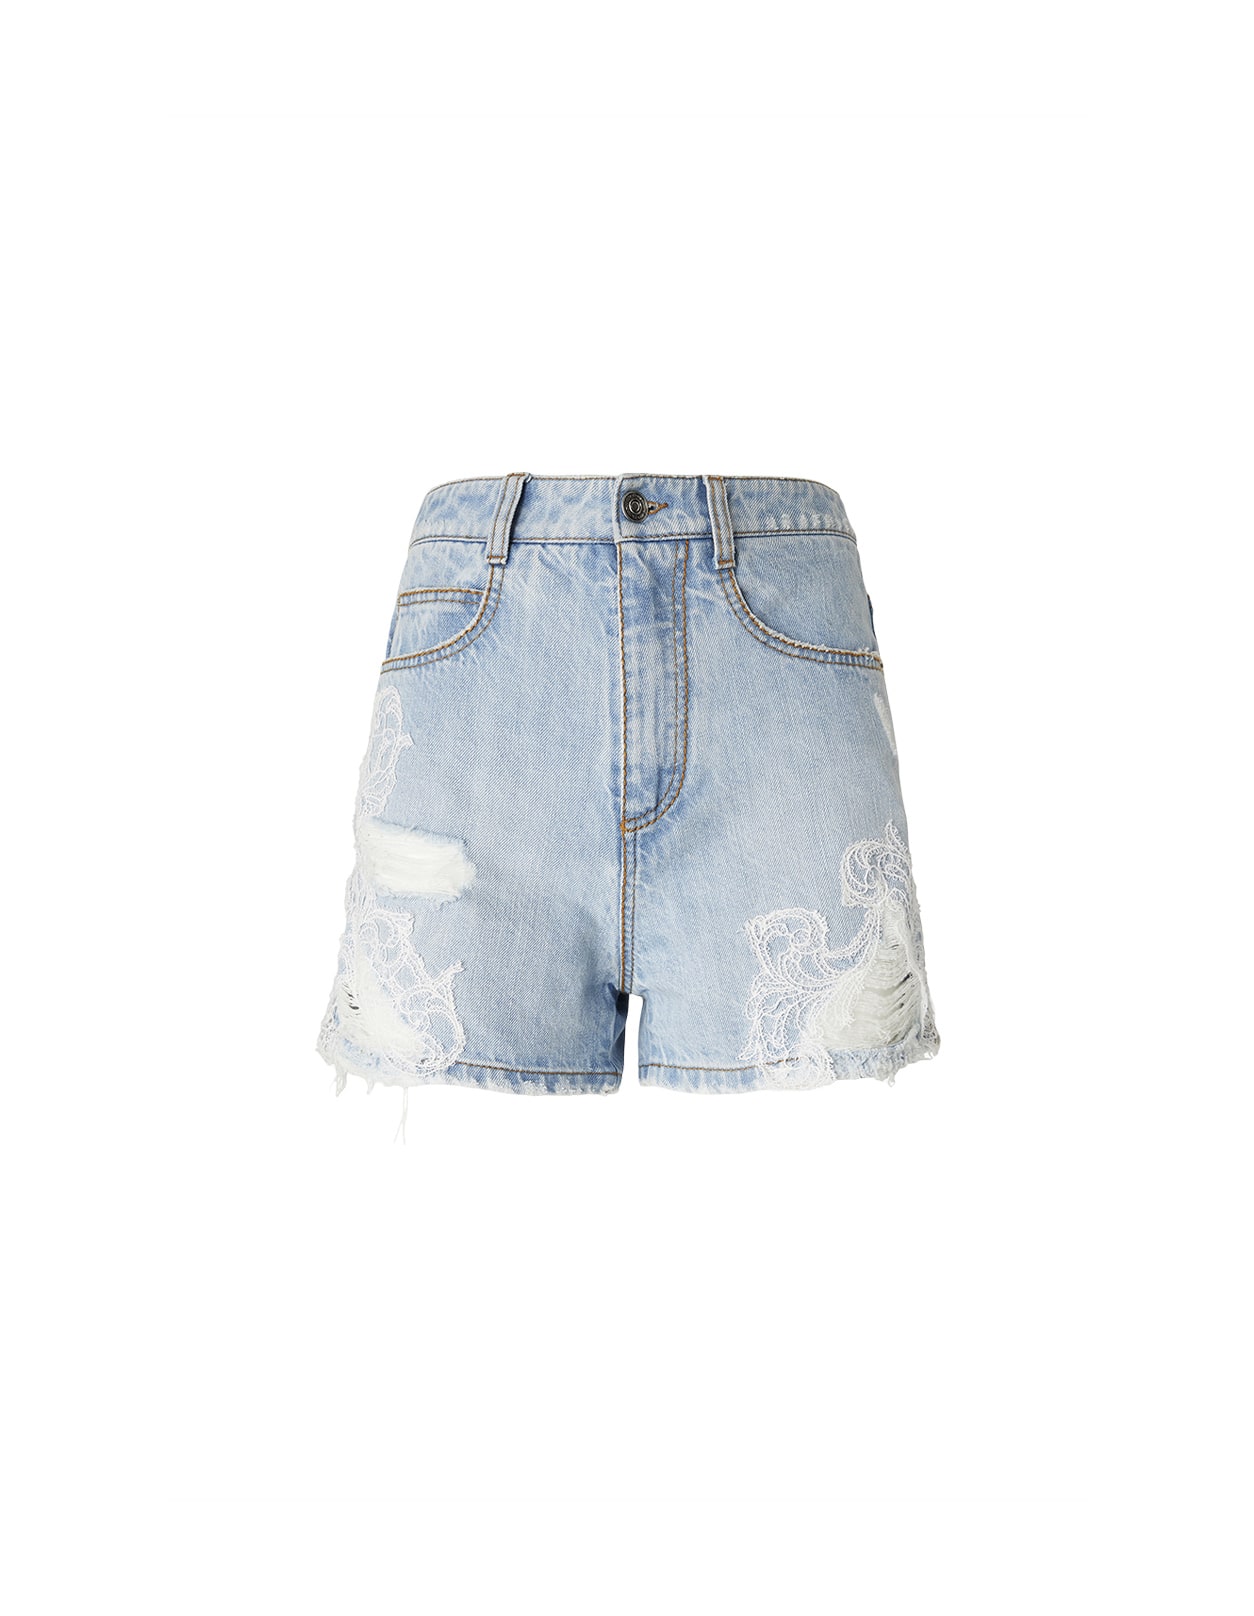 Ermanno Scervino Light Blue Jeans Shorts With Lace